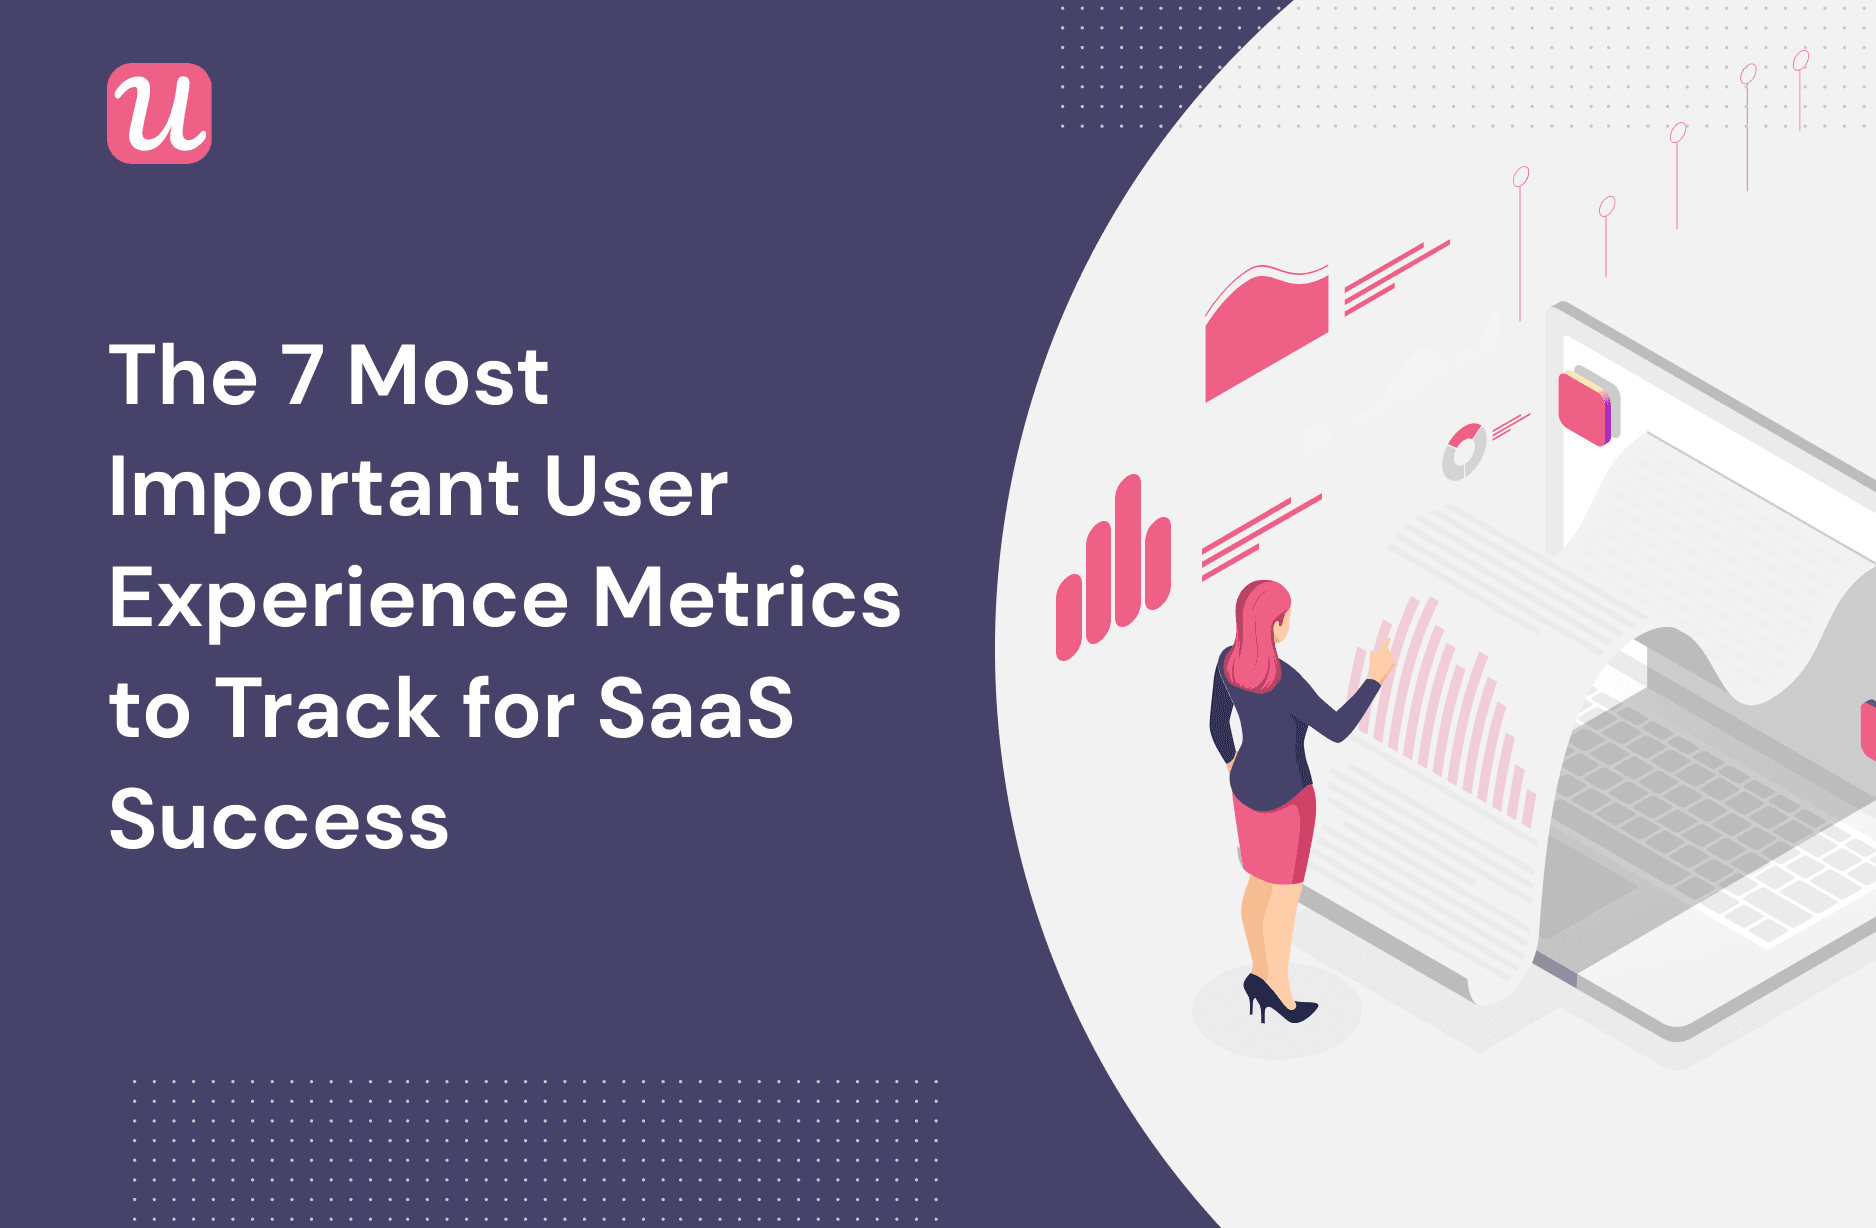 The 7 Most Important User Experience Metrics To Track For SaaS Success